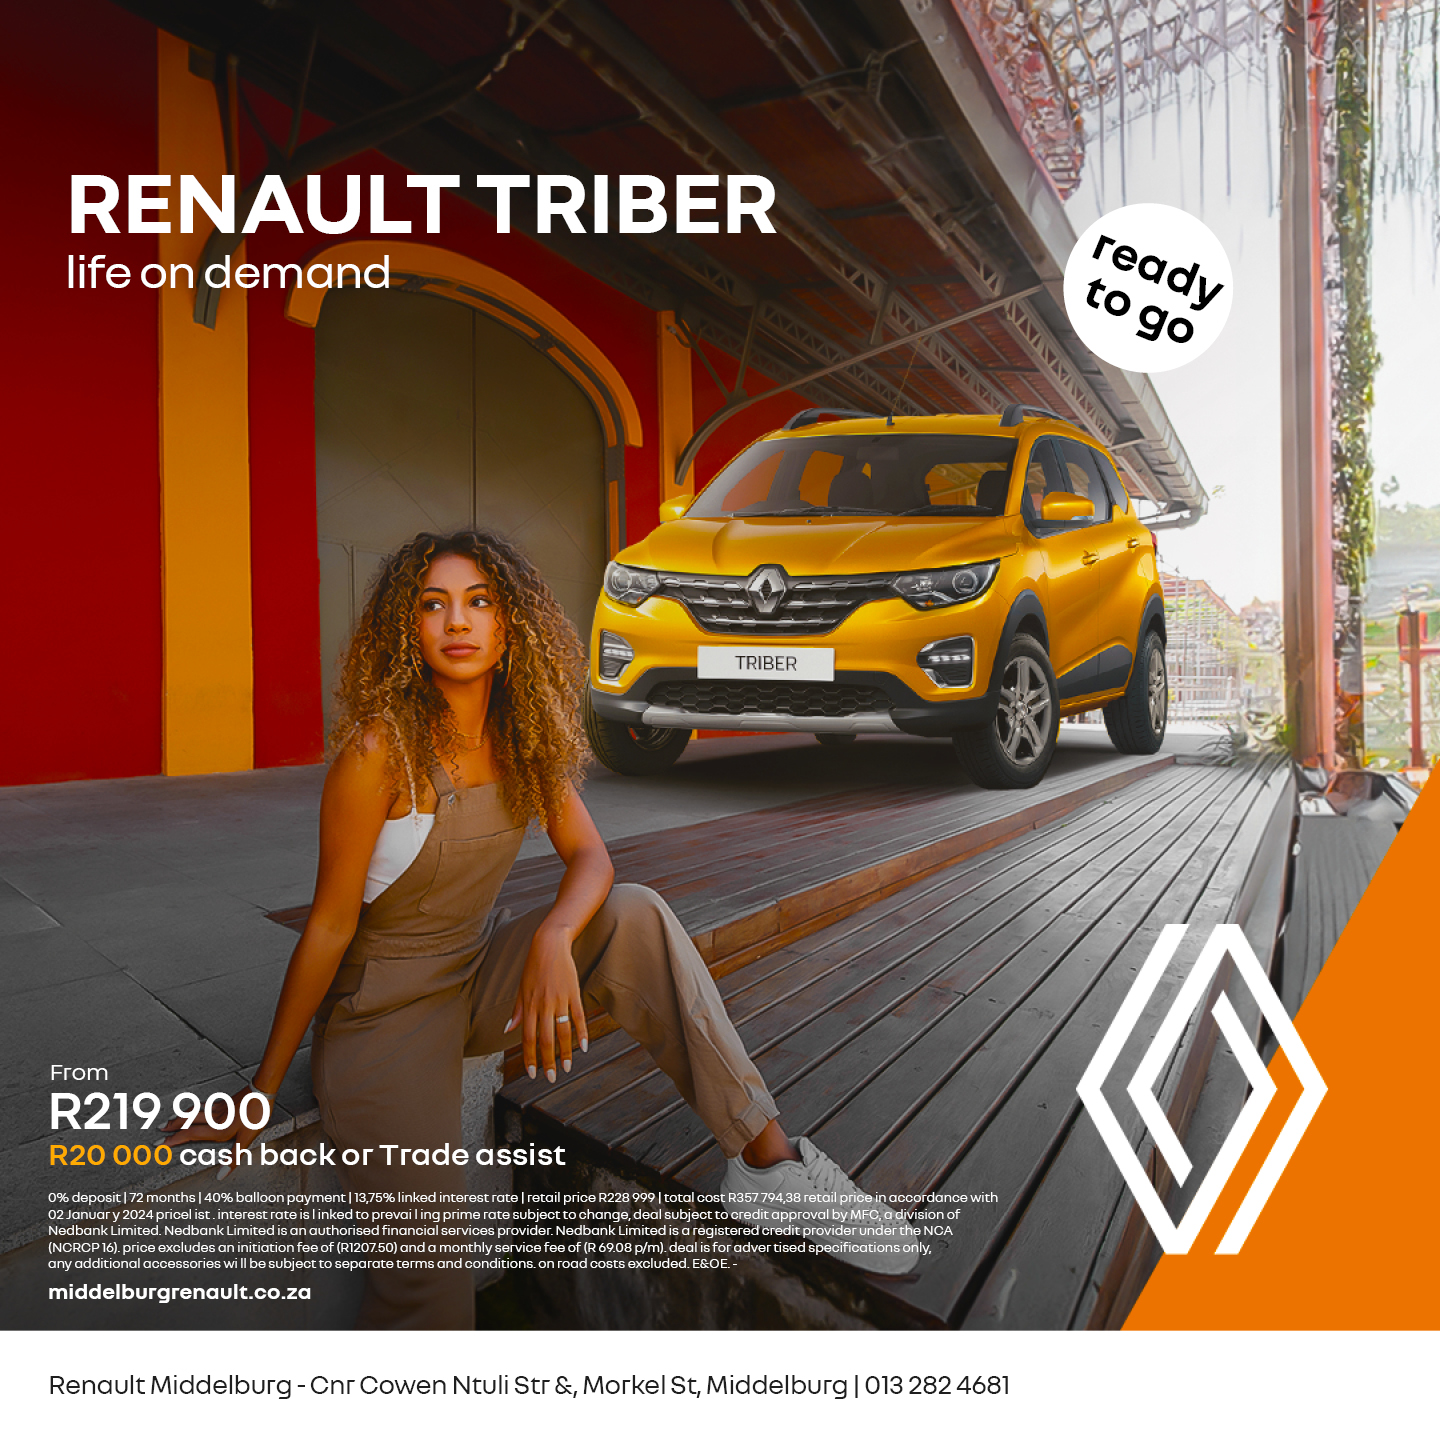 Renault Triber image from 